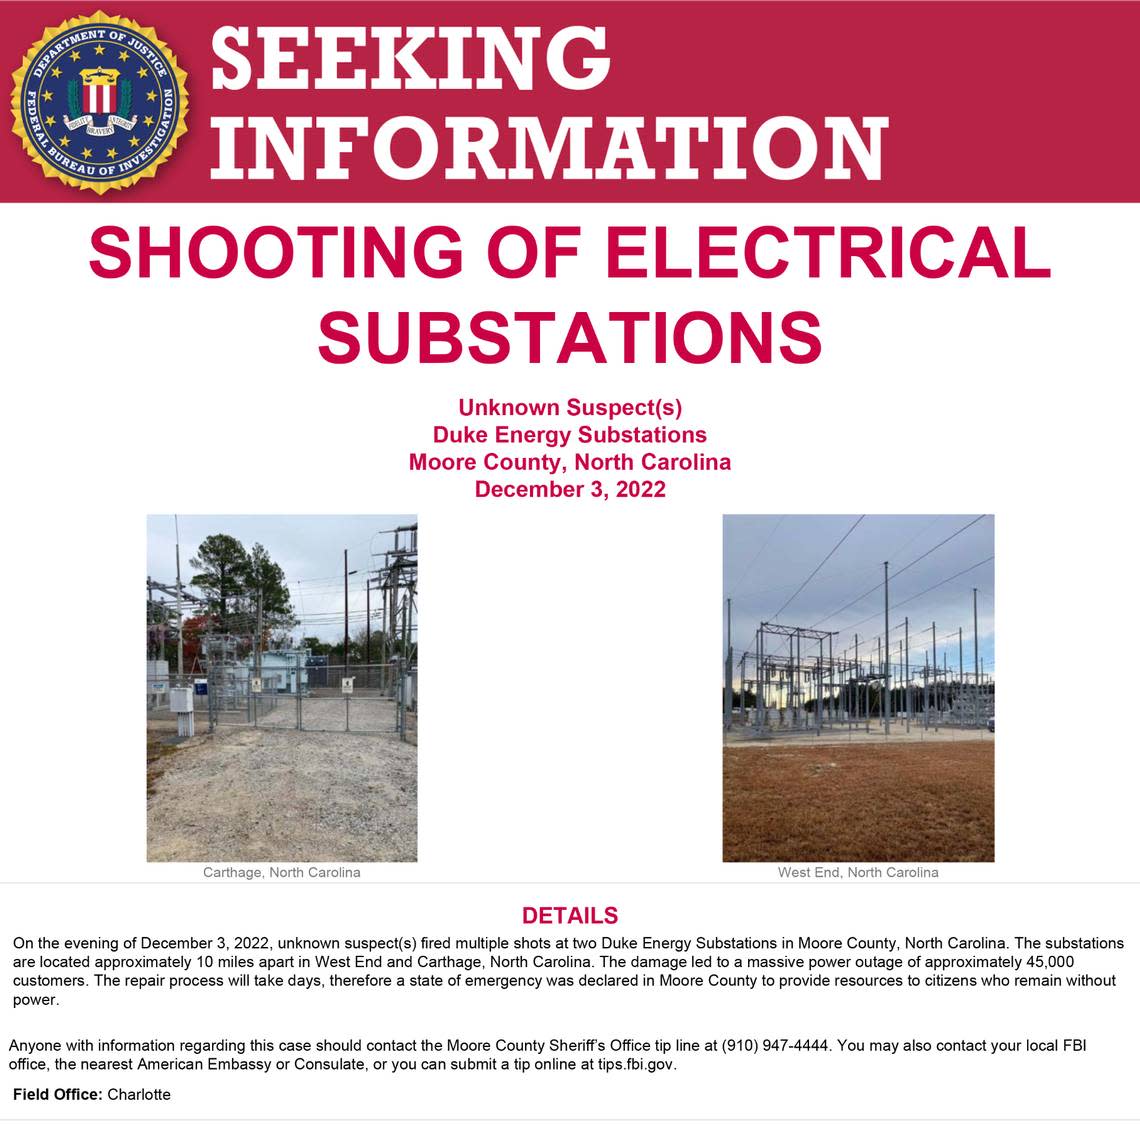 A poster released by the FBI seeing information or suspects of the shooting of electrical substations in Moore County.